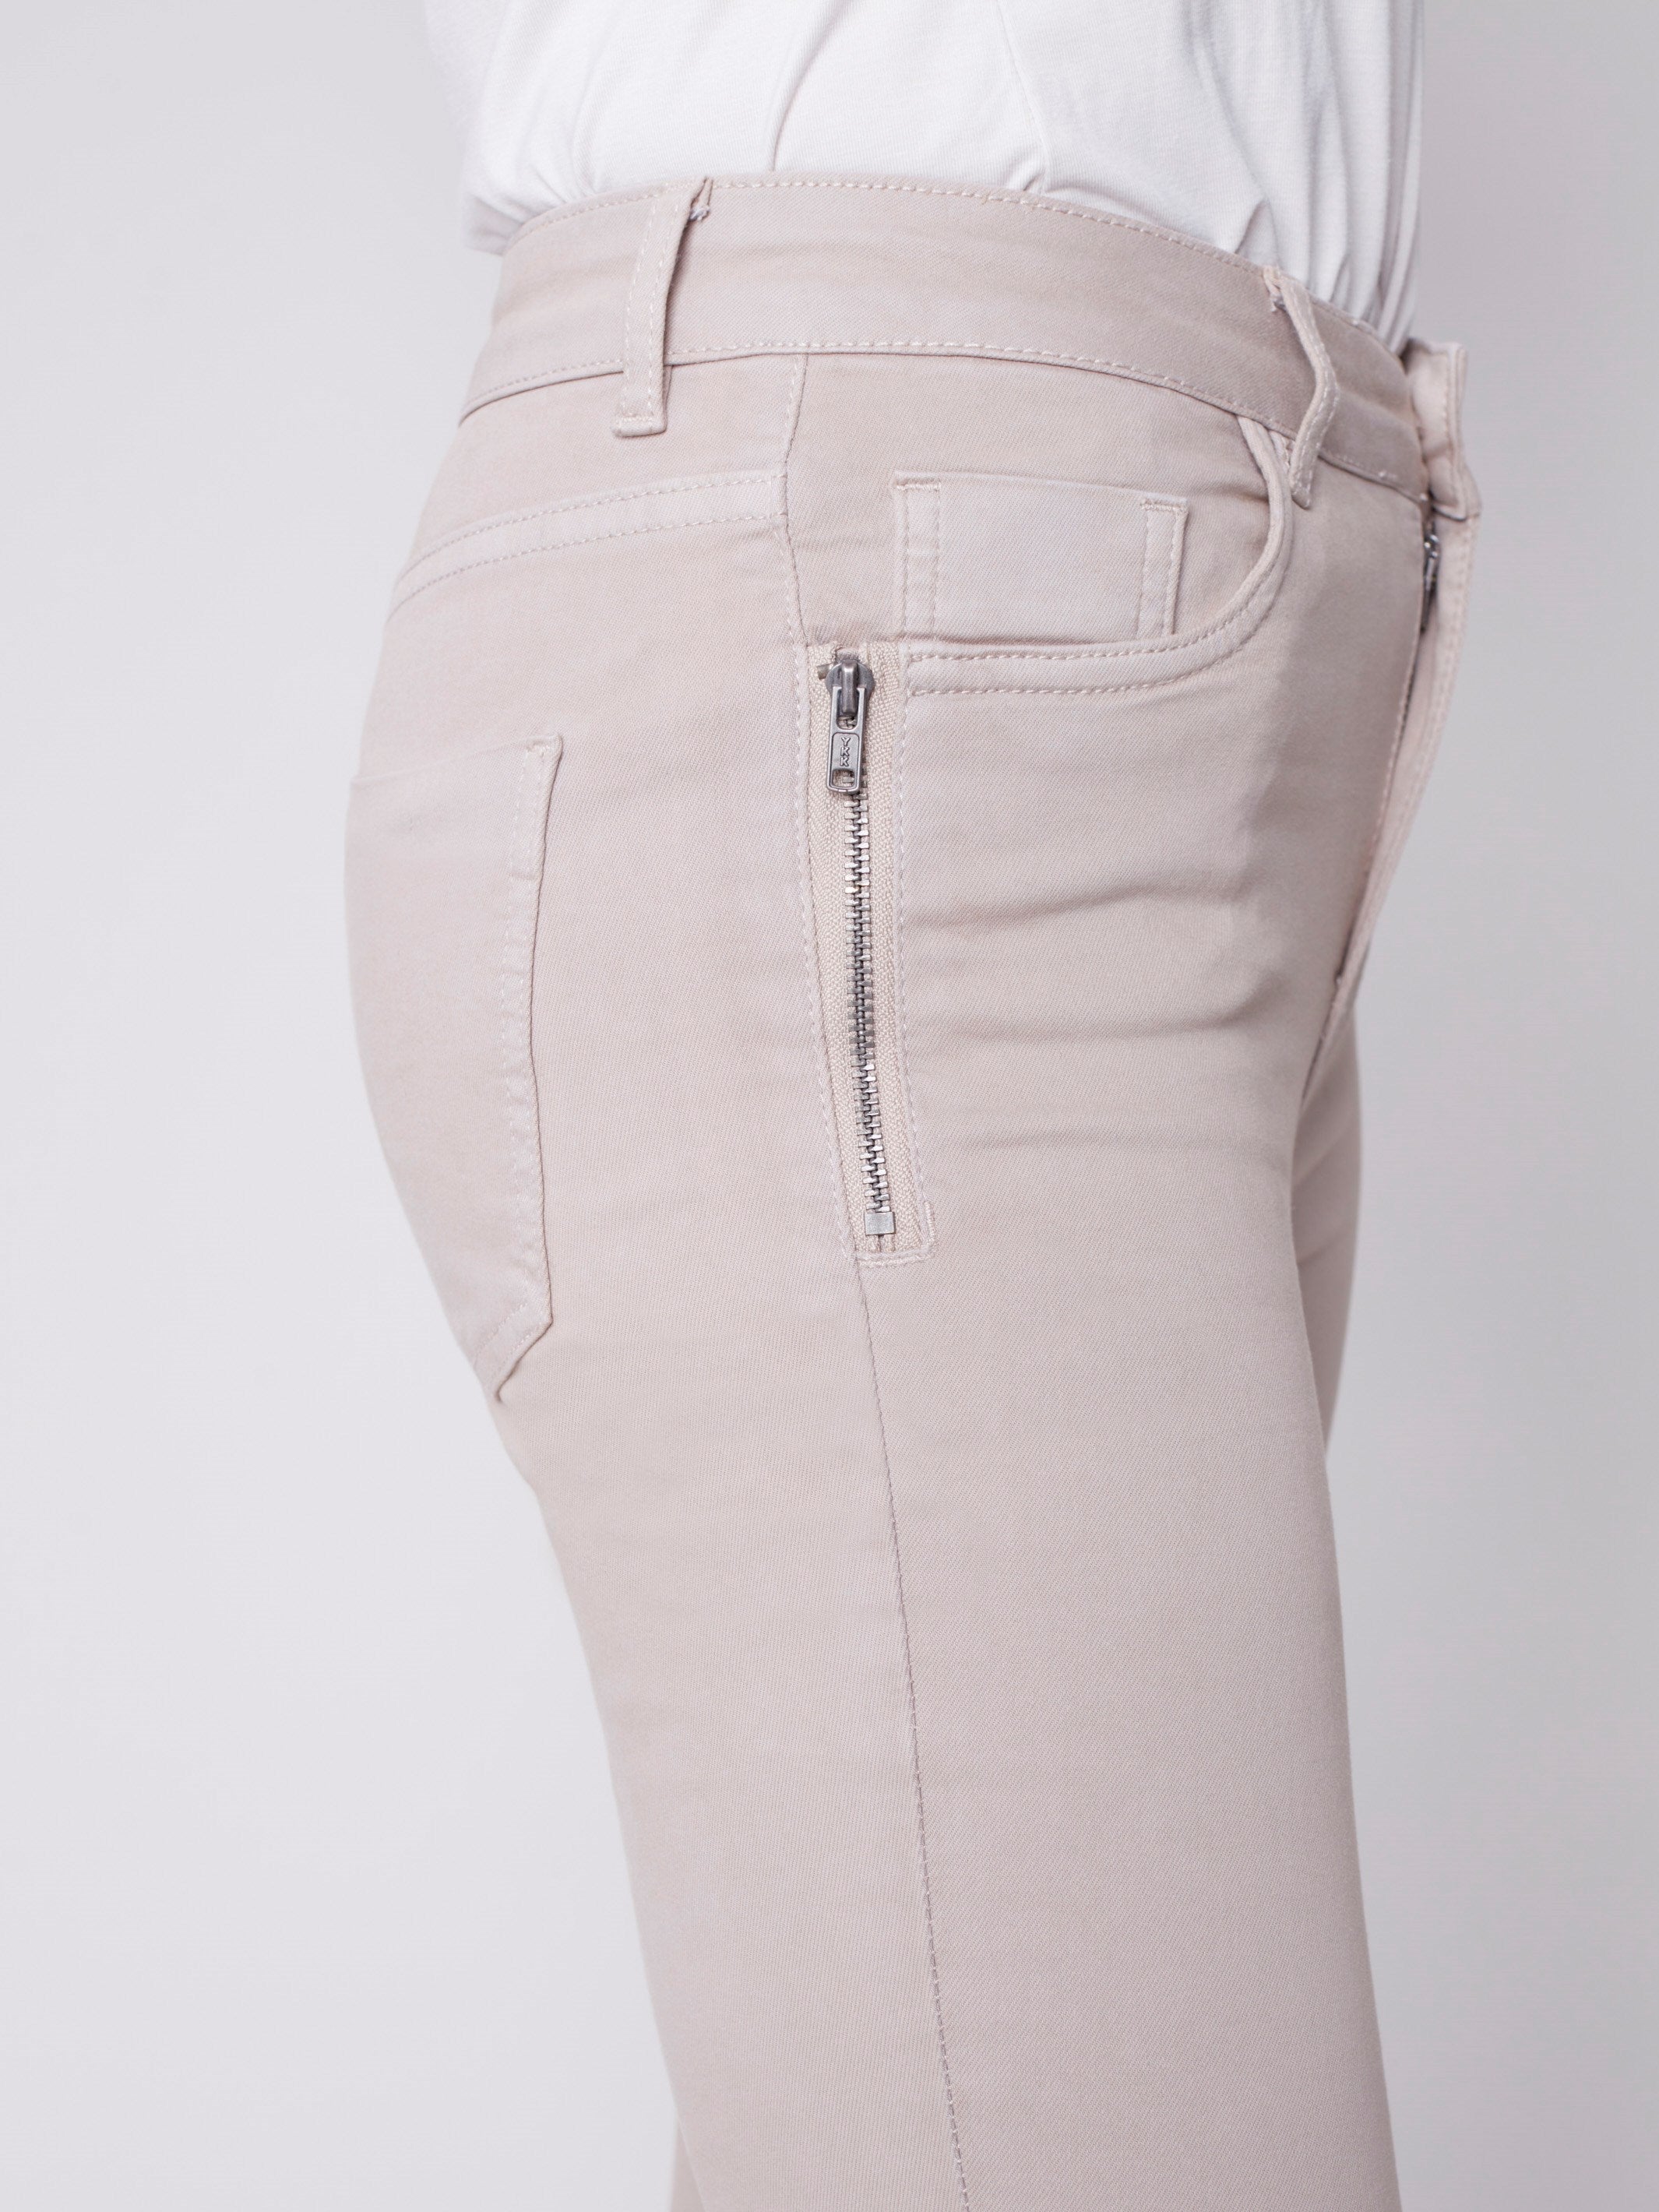 Twill Pants with Zipper Pocket Detail - Almond